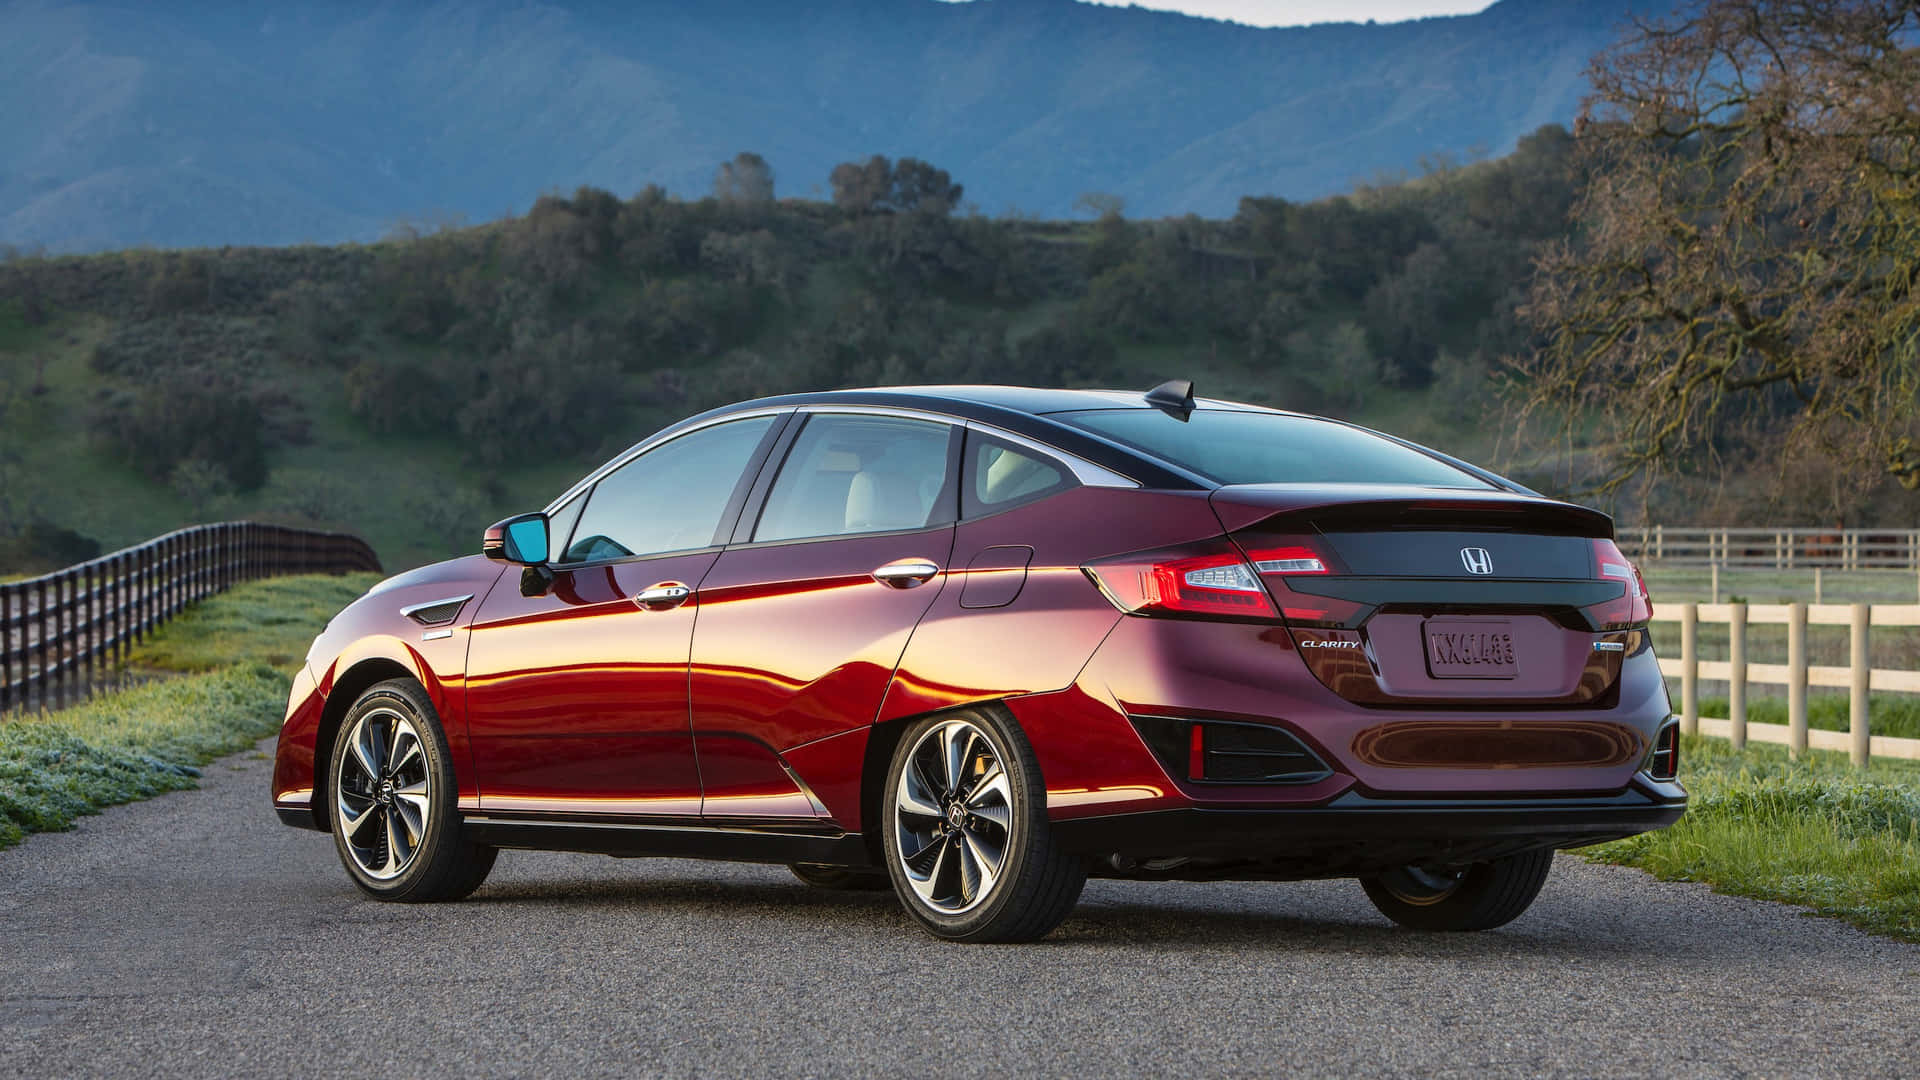 Sharp and sophisticated Honda Clarity on the road Wallpaper